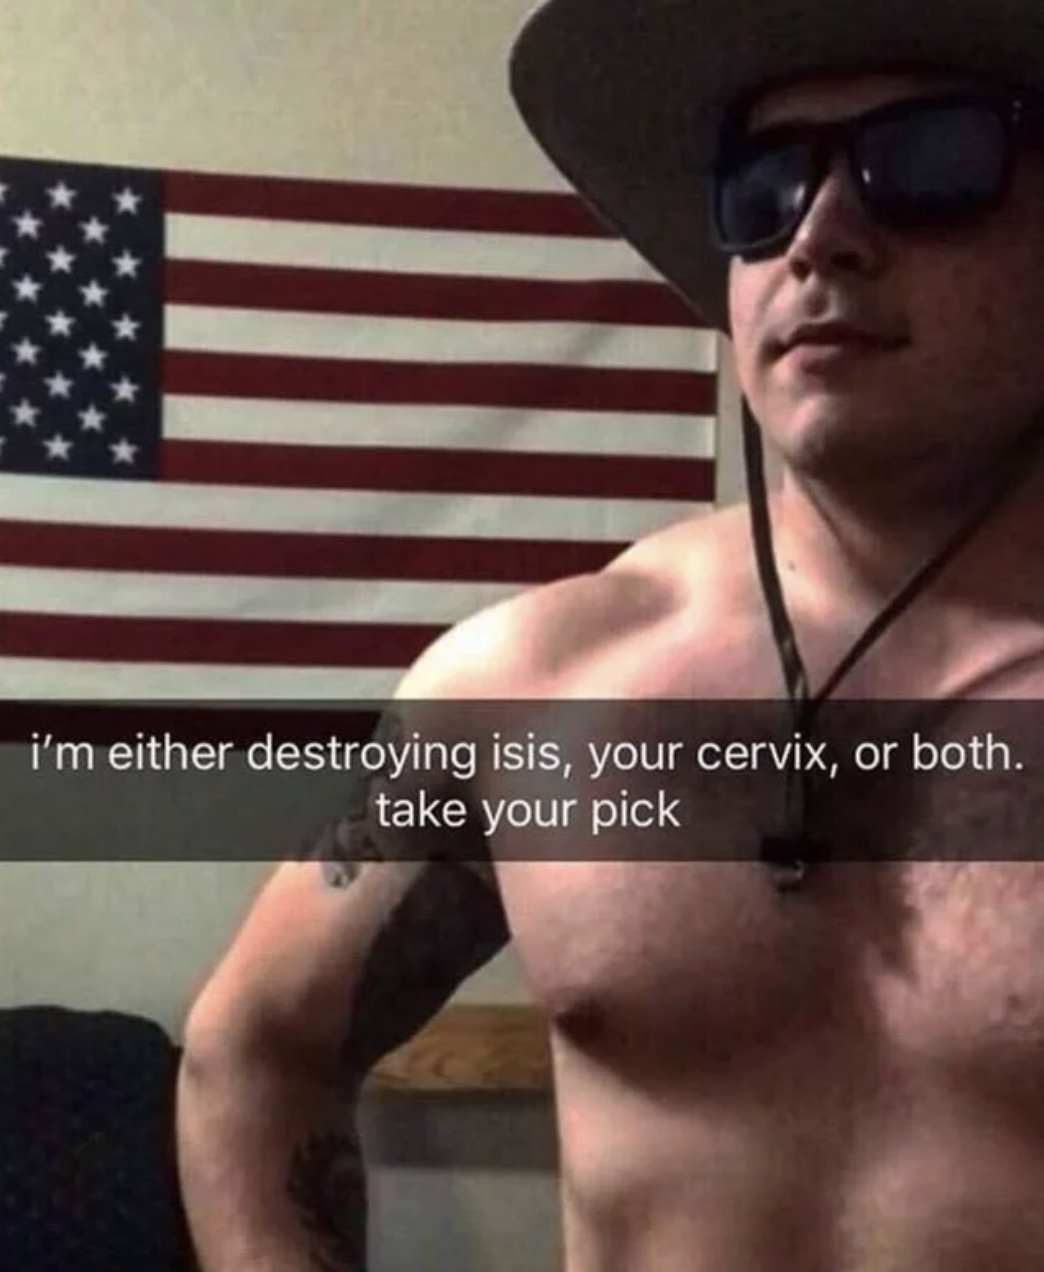 I have sex - i'm either destroying isis, your cervix, or both. take your pick